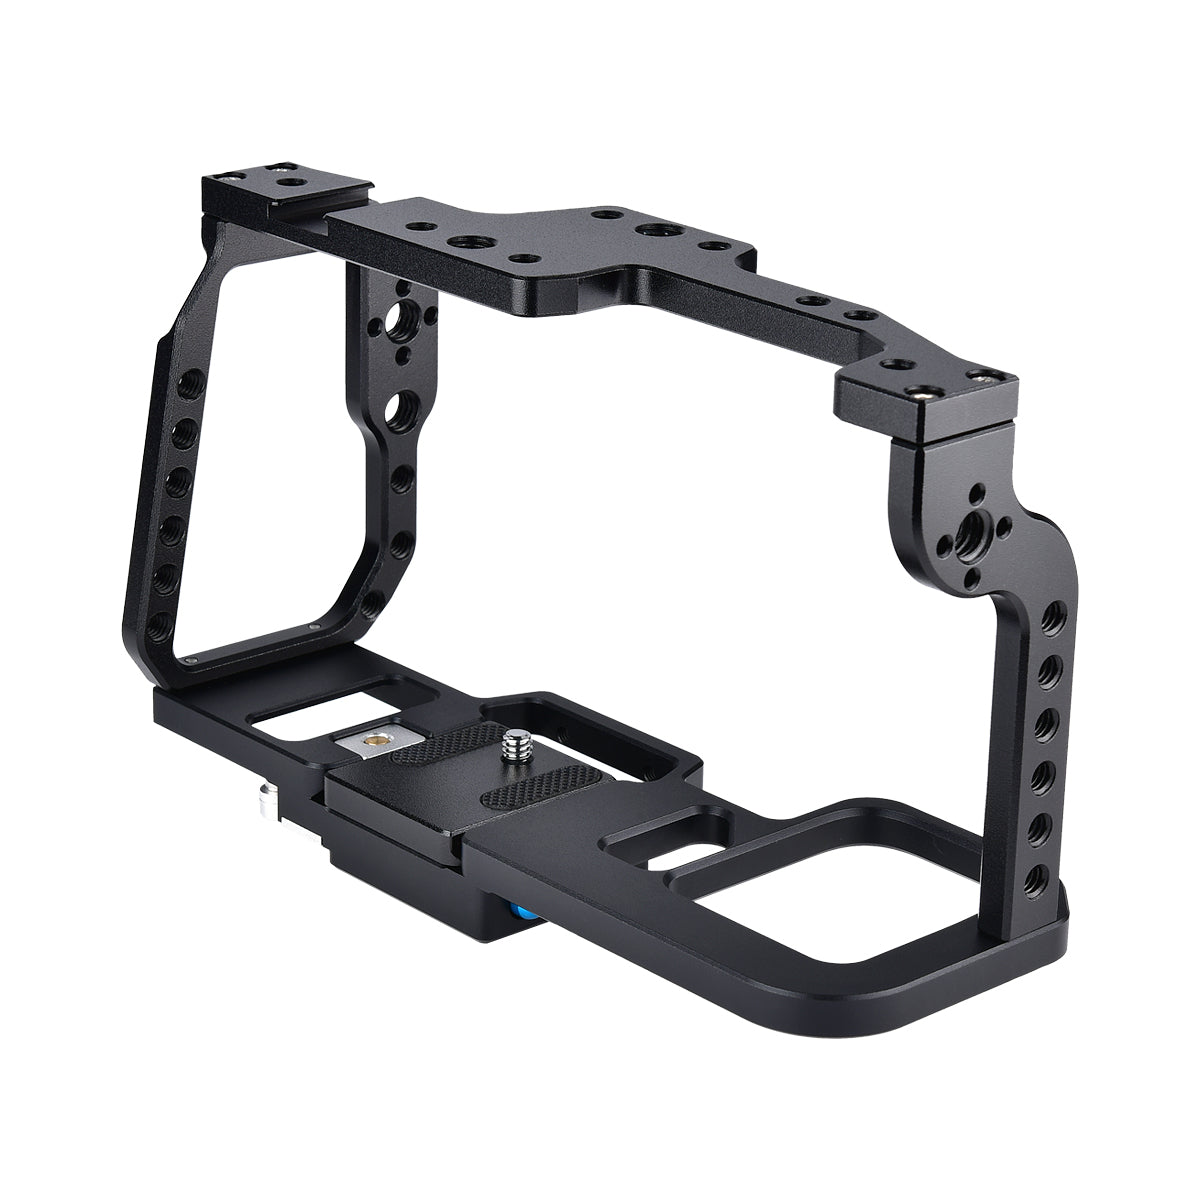 Yelangu C9-A Quick Release Cage for Blackmagic Camera bmpcc 4K & 6K with Quick Release Plate